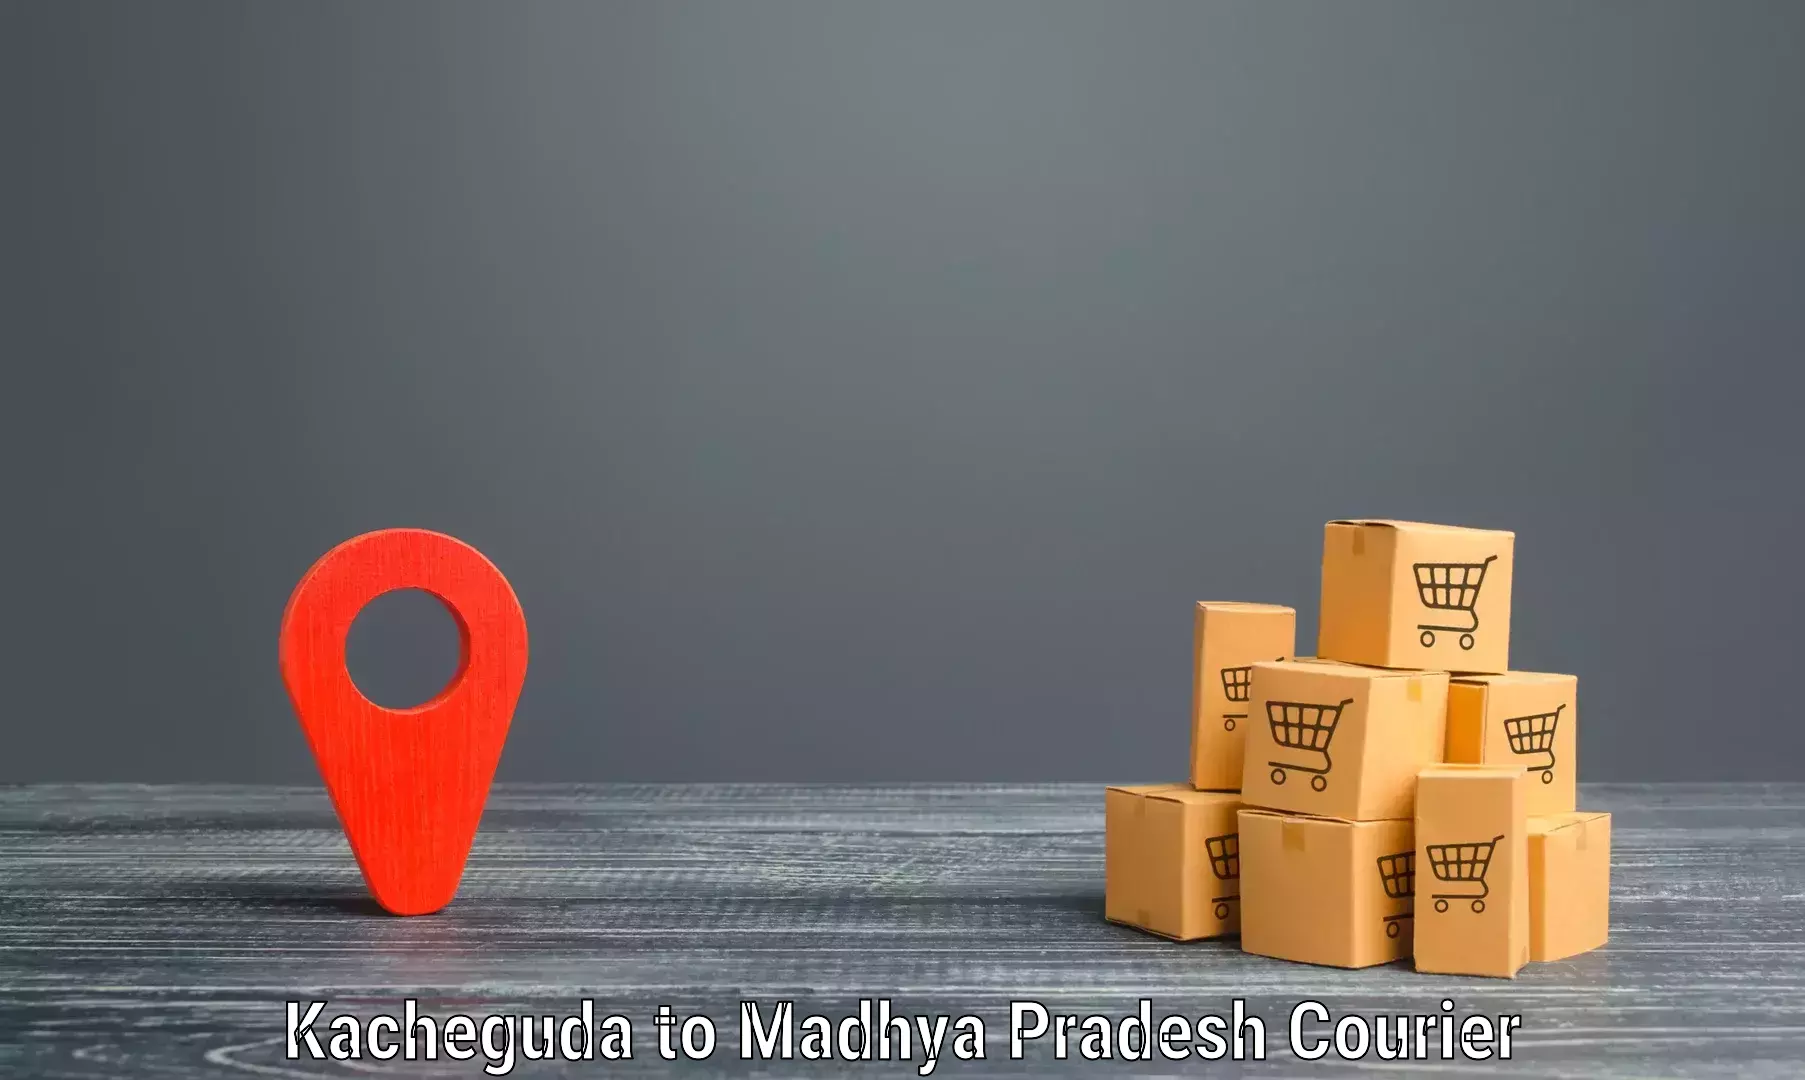 Next day courier Kacheguda to Bhopal